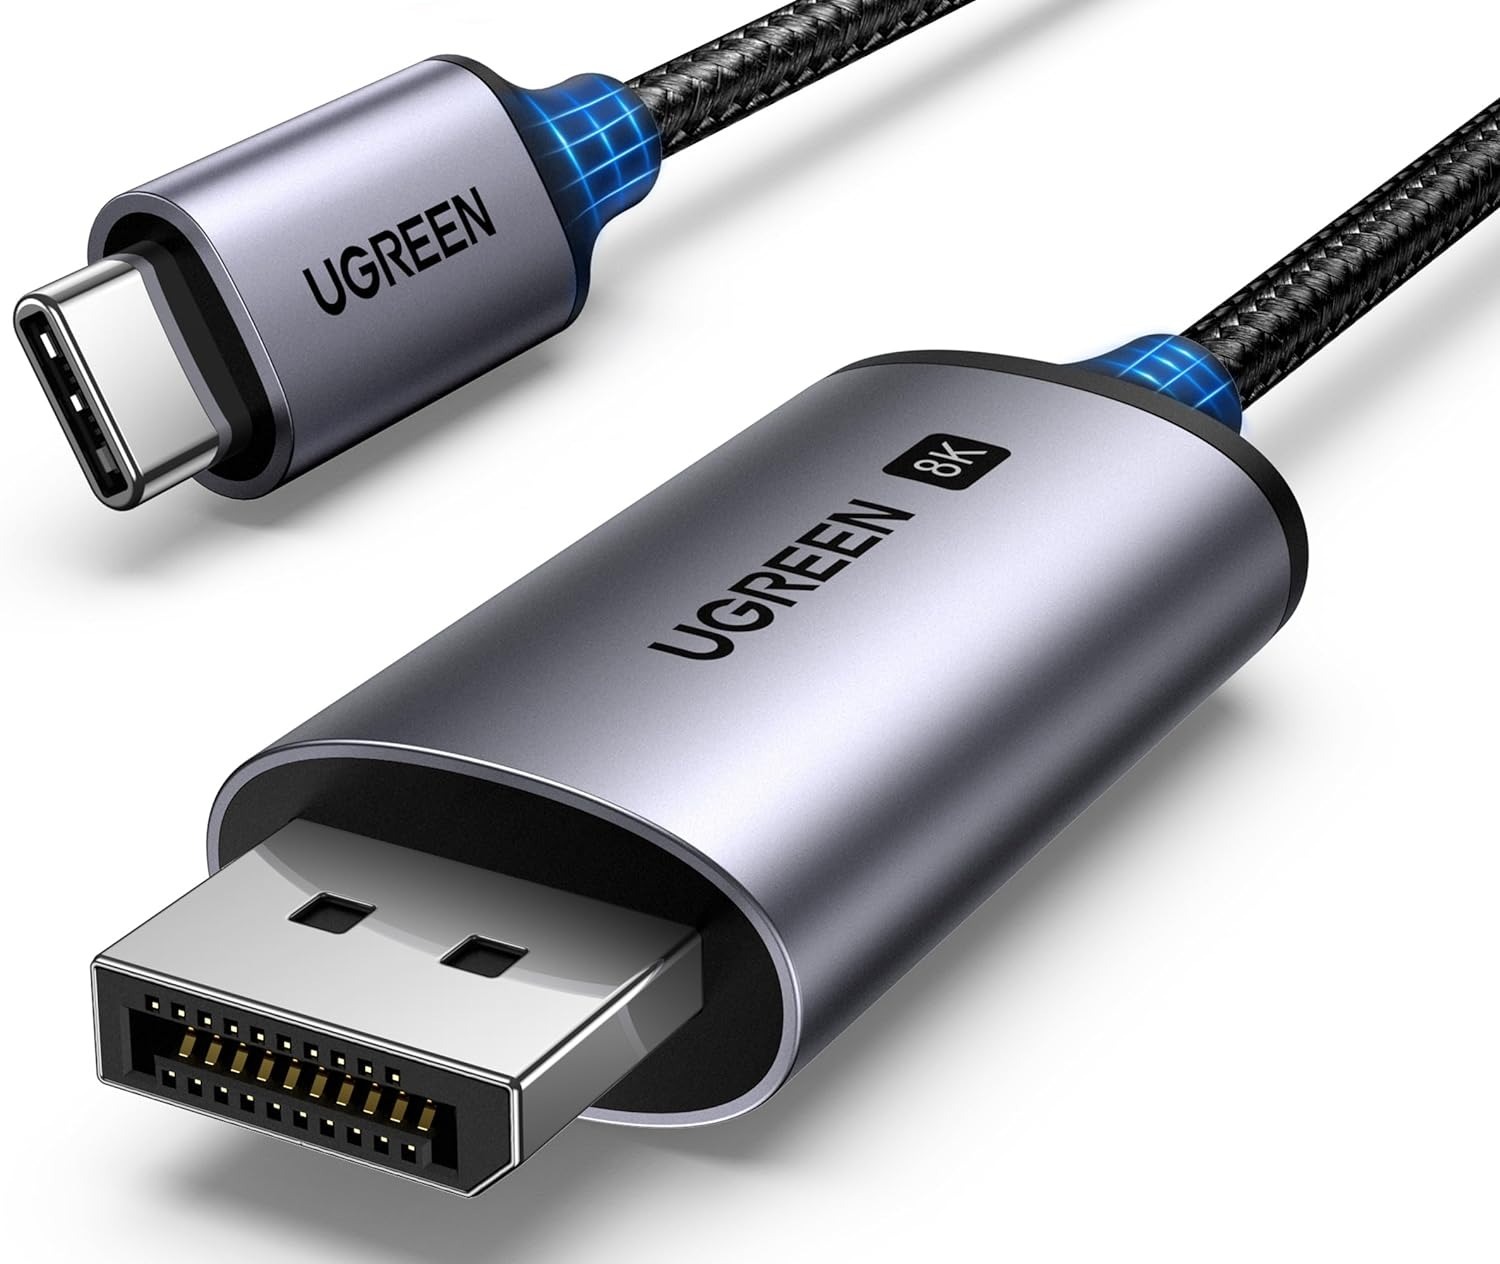 Prime Members: UGREEN USB C to 3.5mm Headphone and Charger Adapter $12.59 & More + Free Shipping w/ Prime or orders $35+